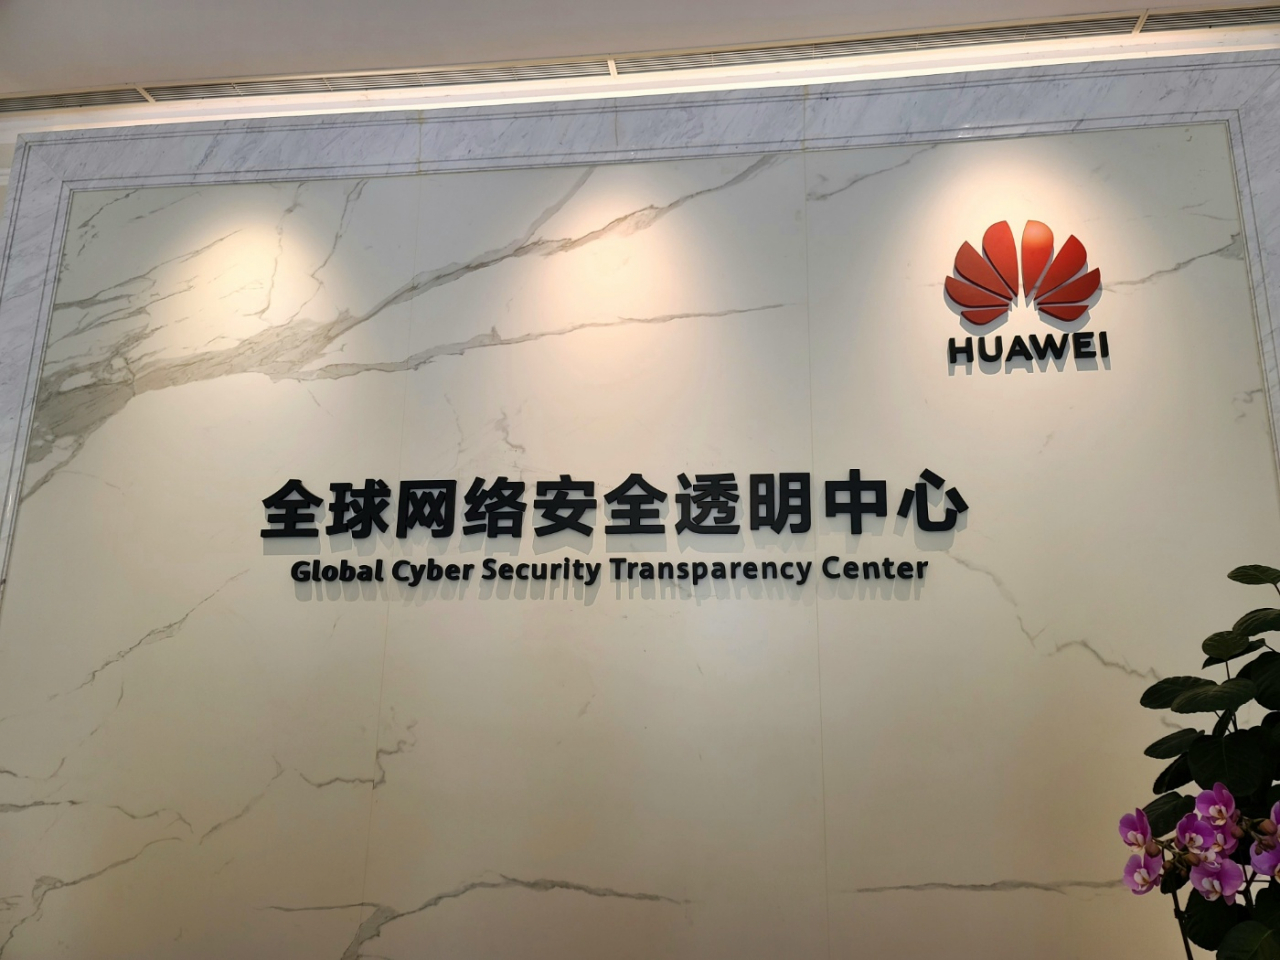 A sign of Huawei Technologies' cybersecurity and privacy protection transparency center in Dongguan, a southern city of China. (Jie Ye-eun/The Korea Herald)